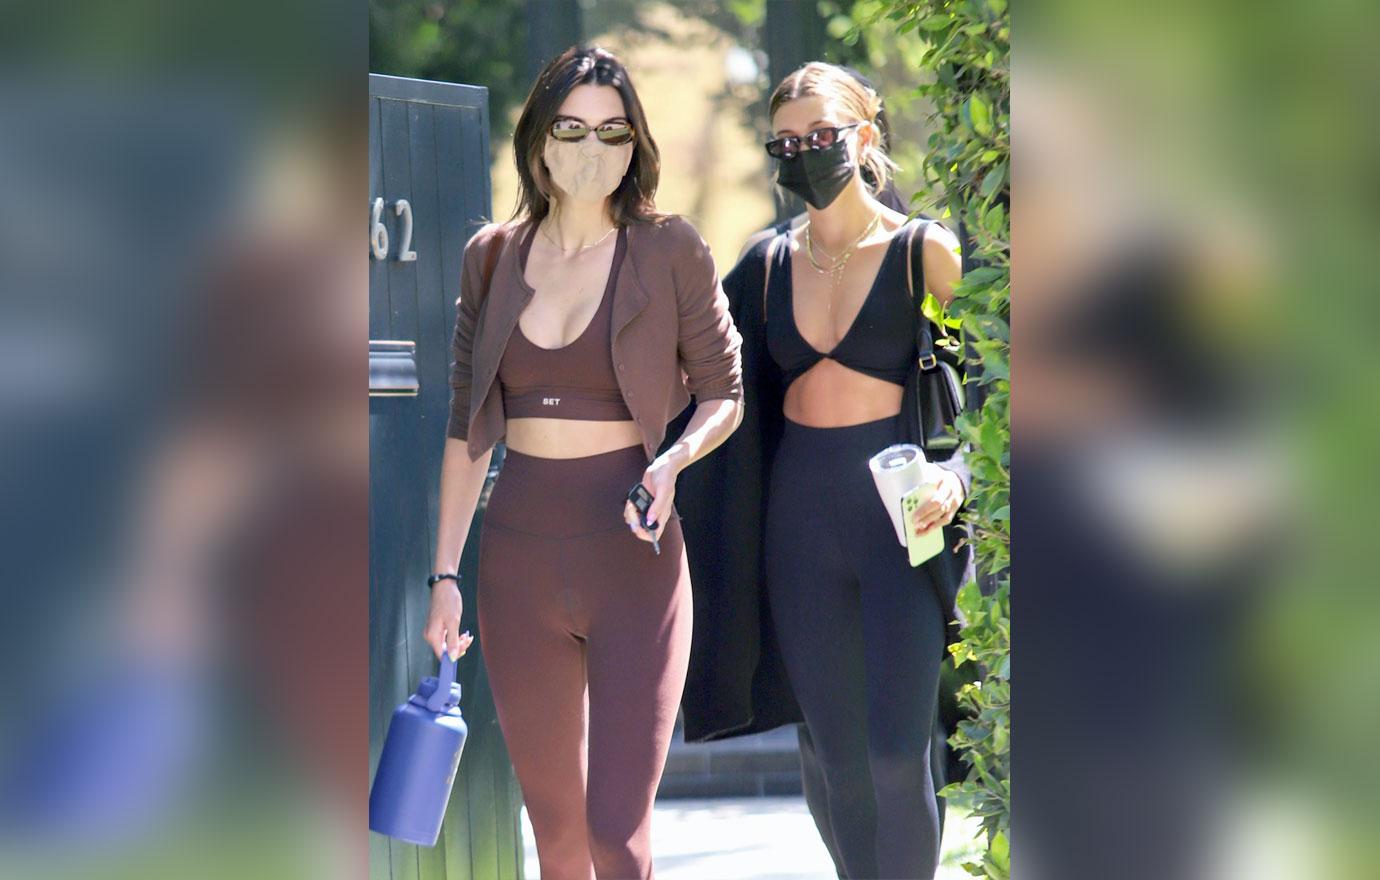 Kendall Jenner Works Out In Navy Bodysuit With BFF Hailey Bieber